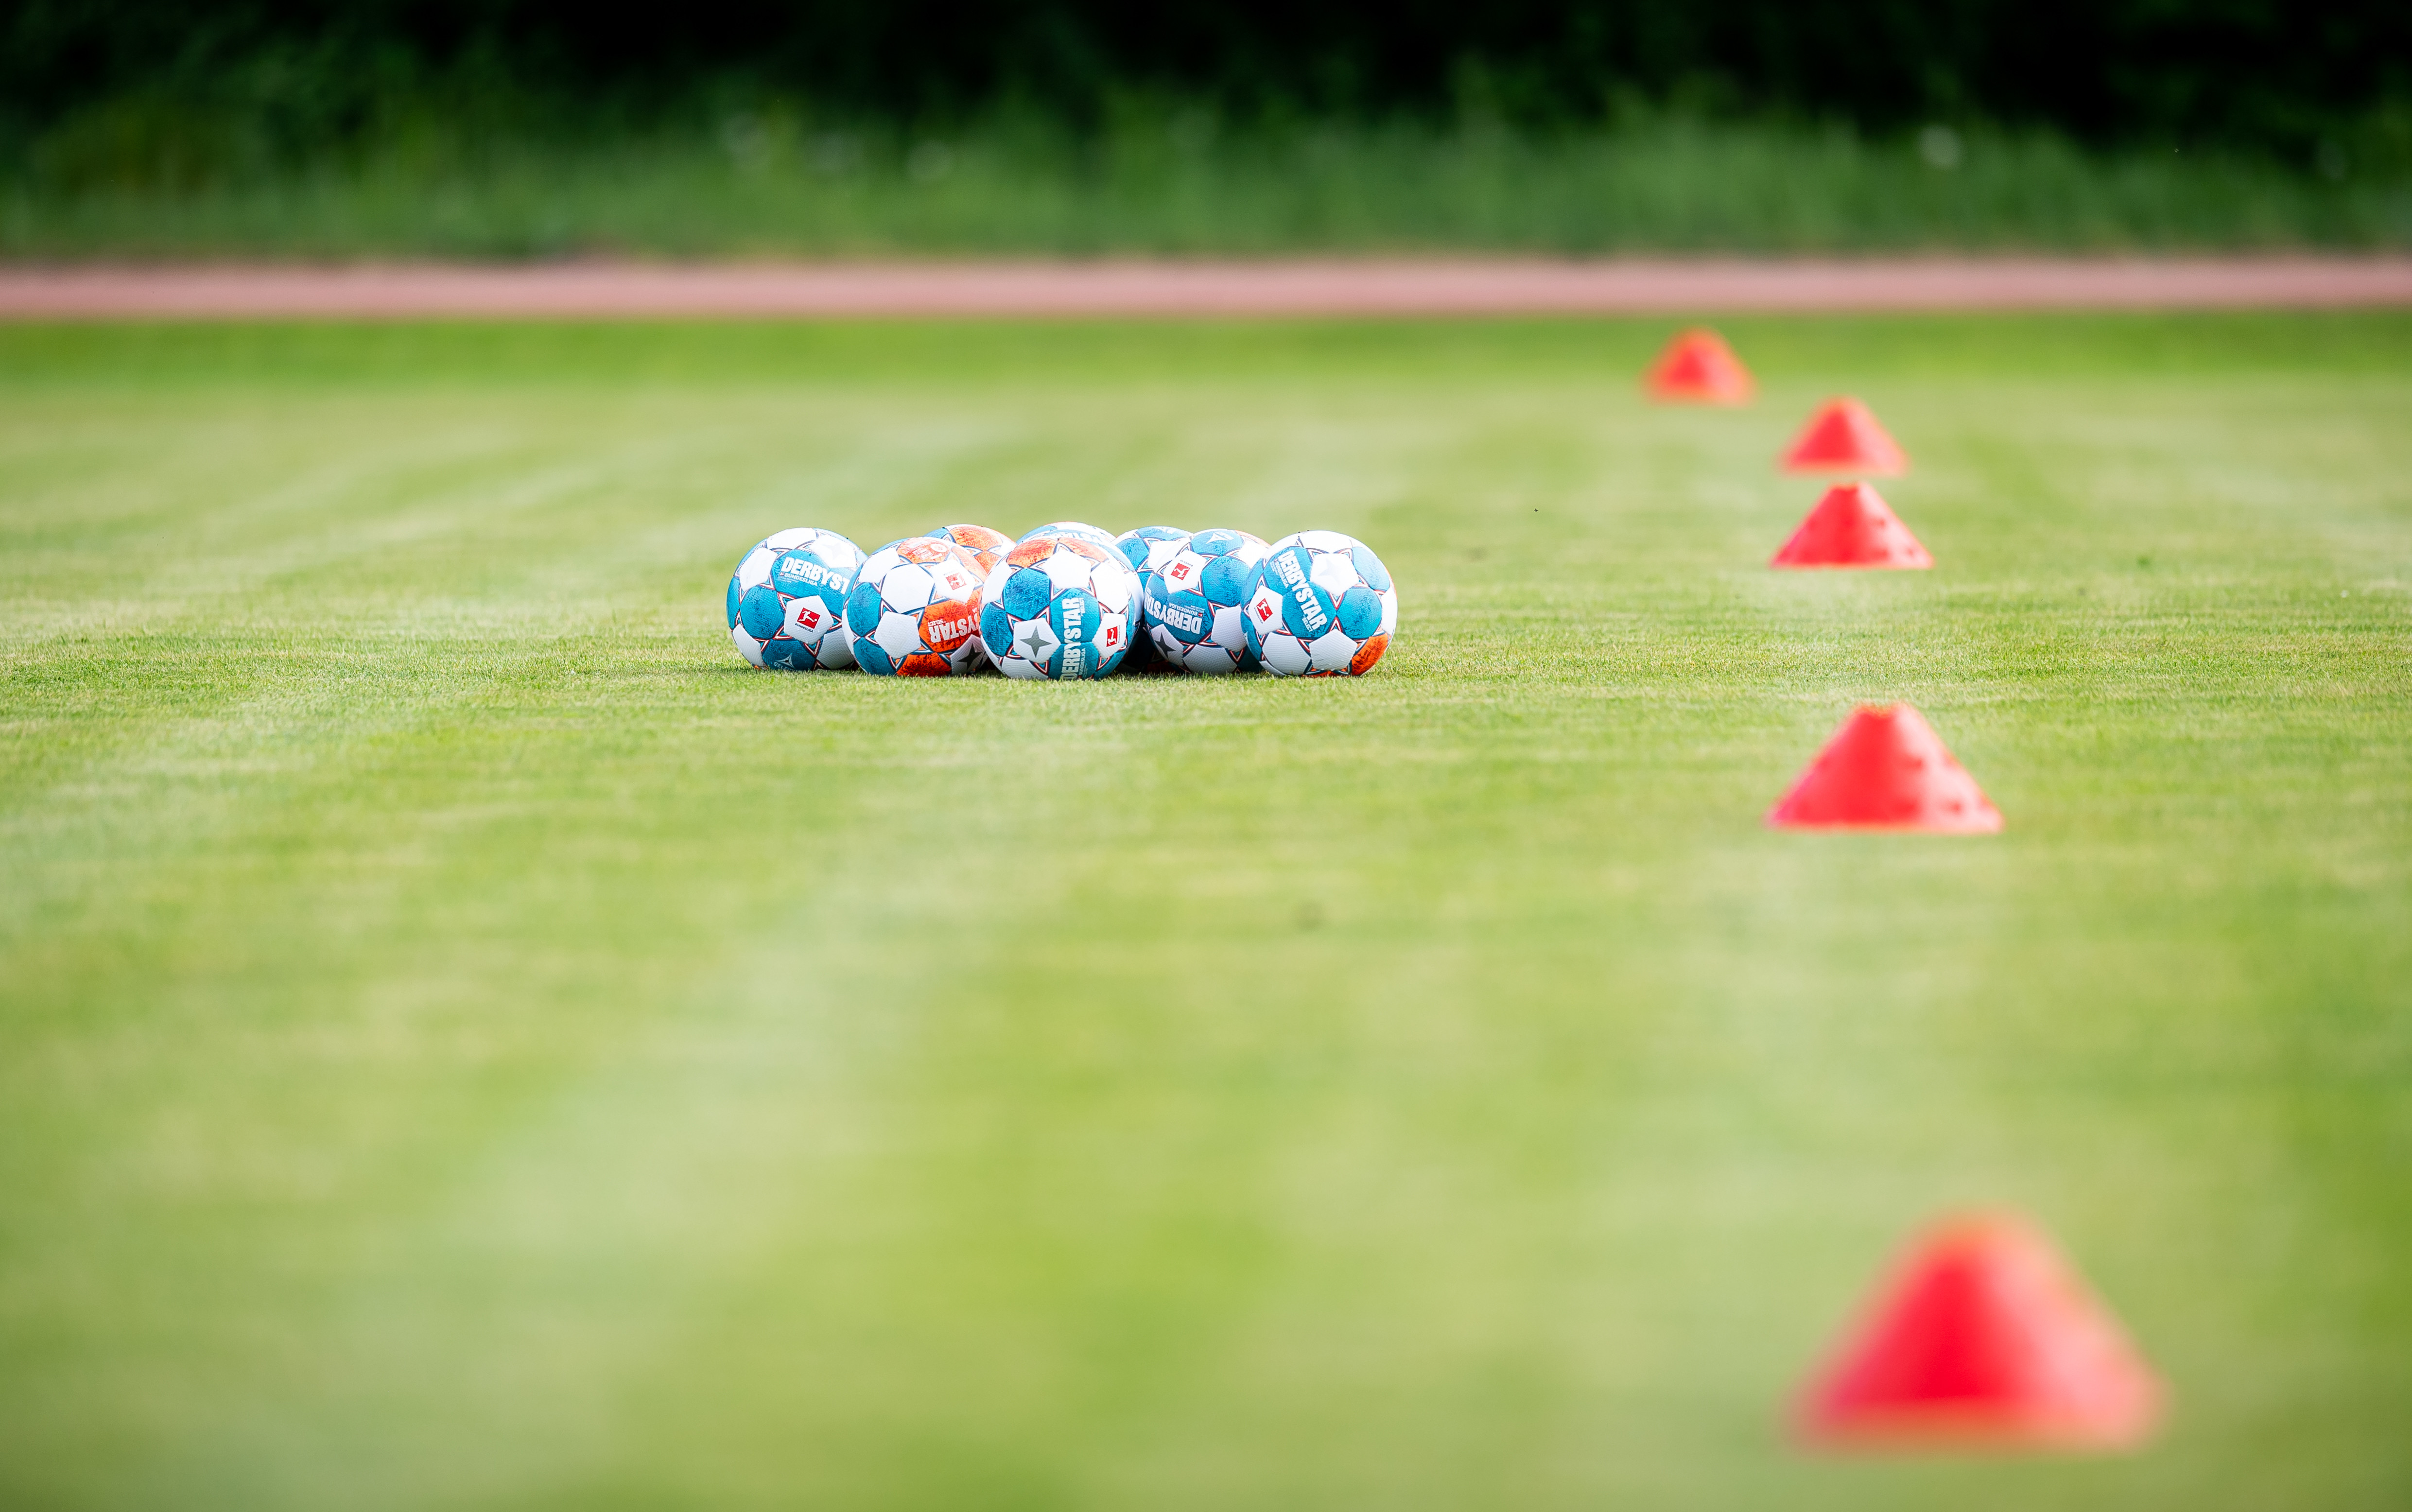 Cones and balls on the training pitch.